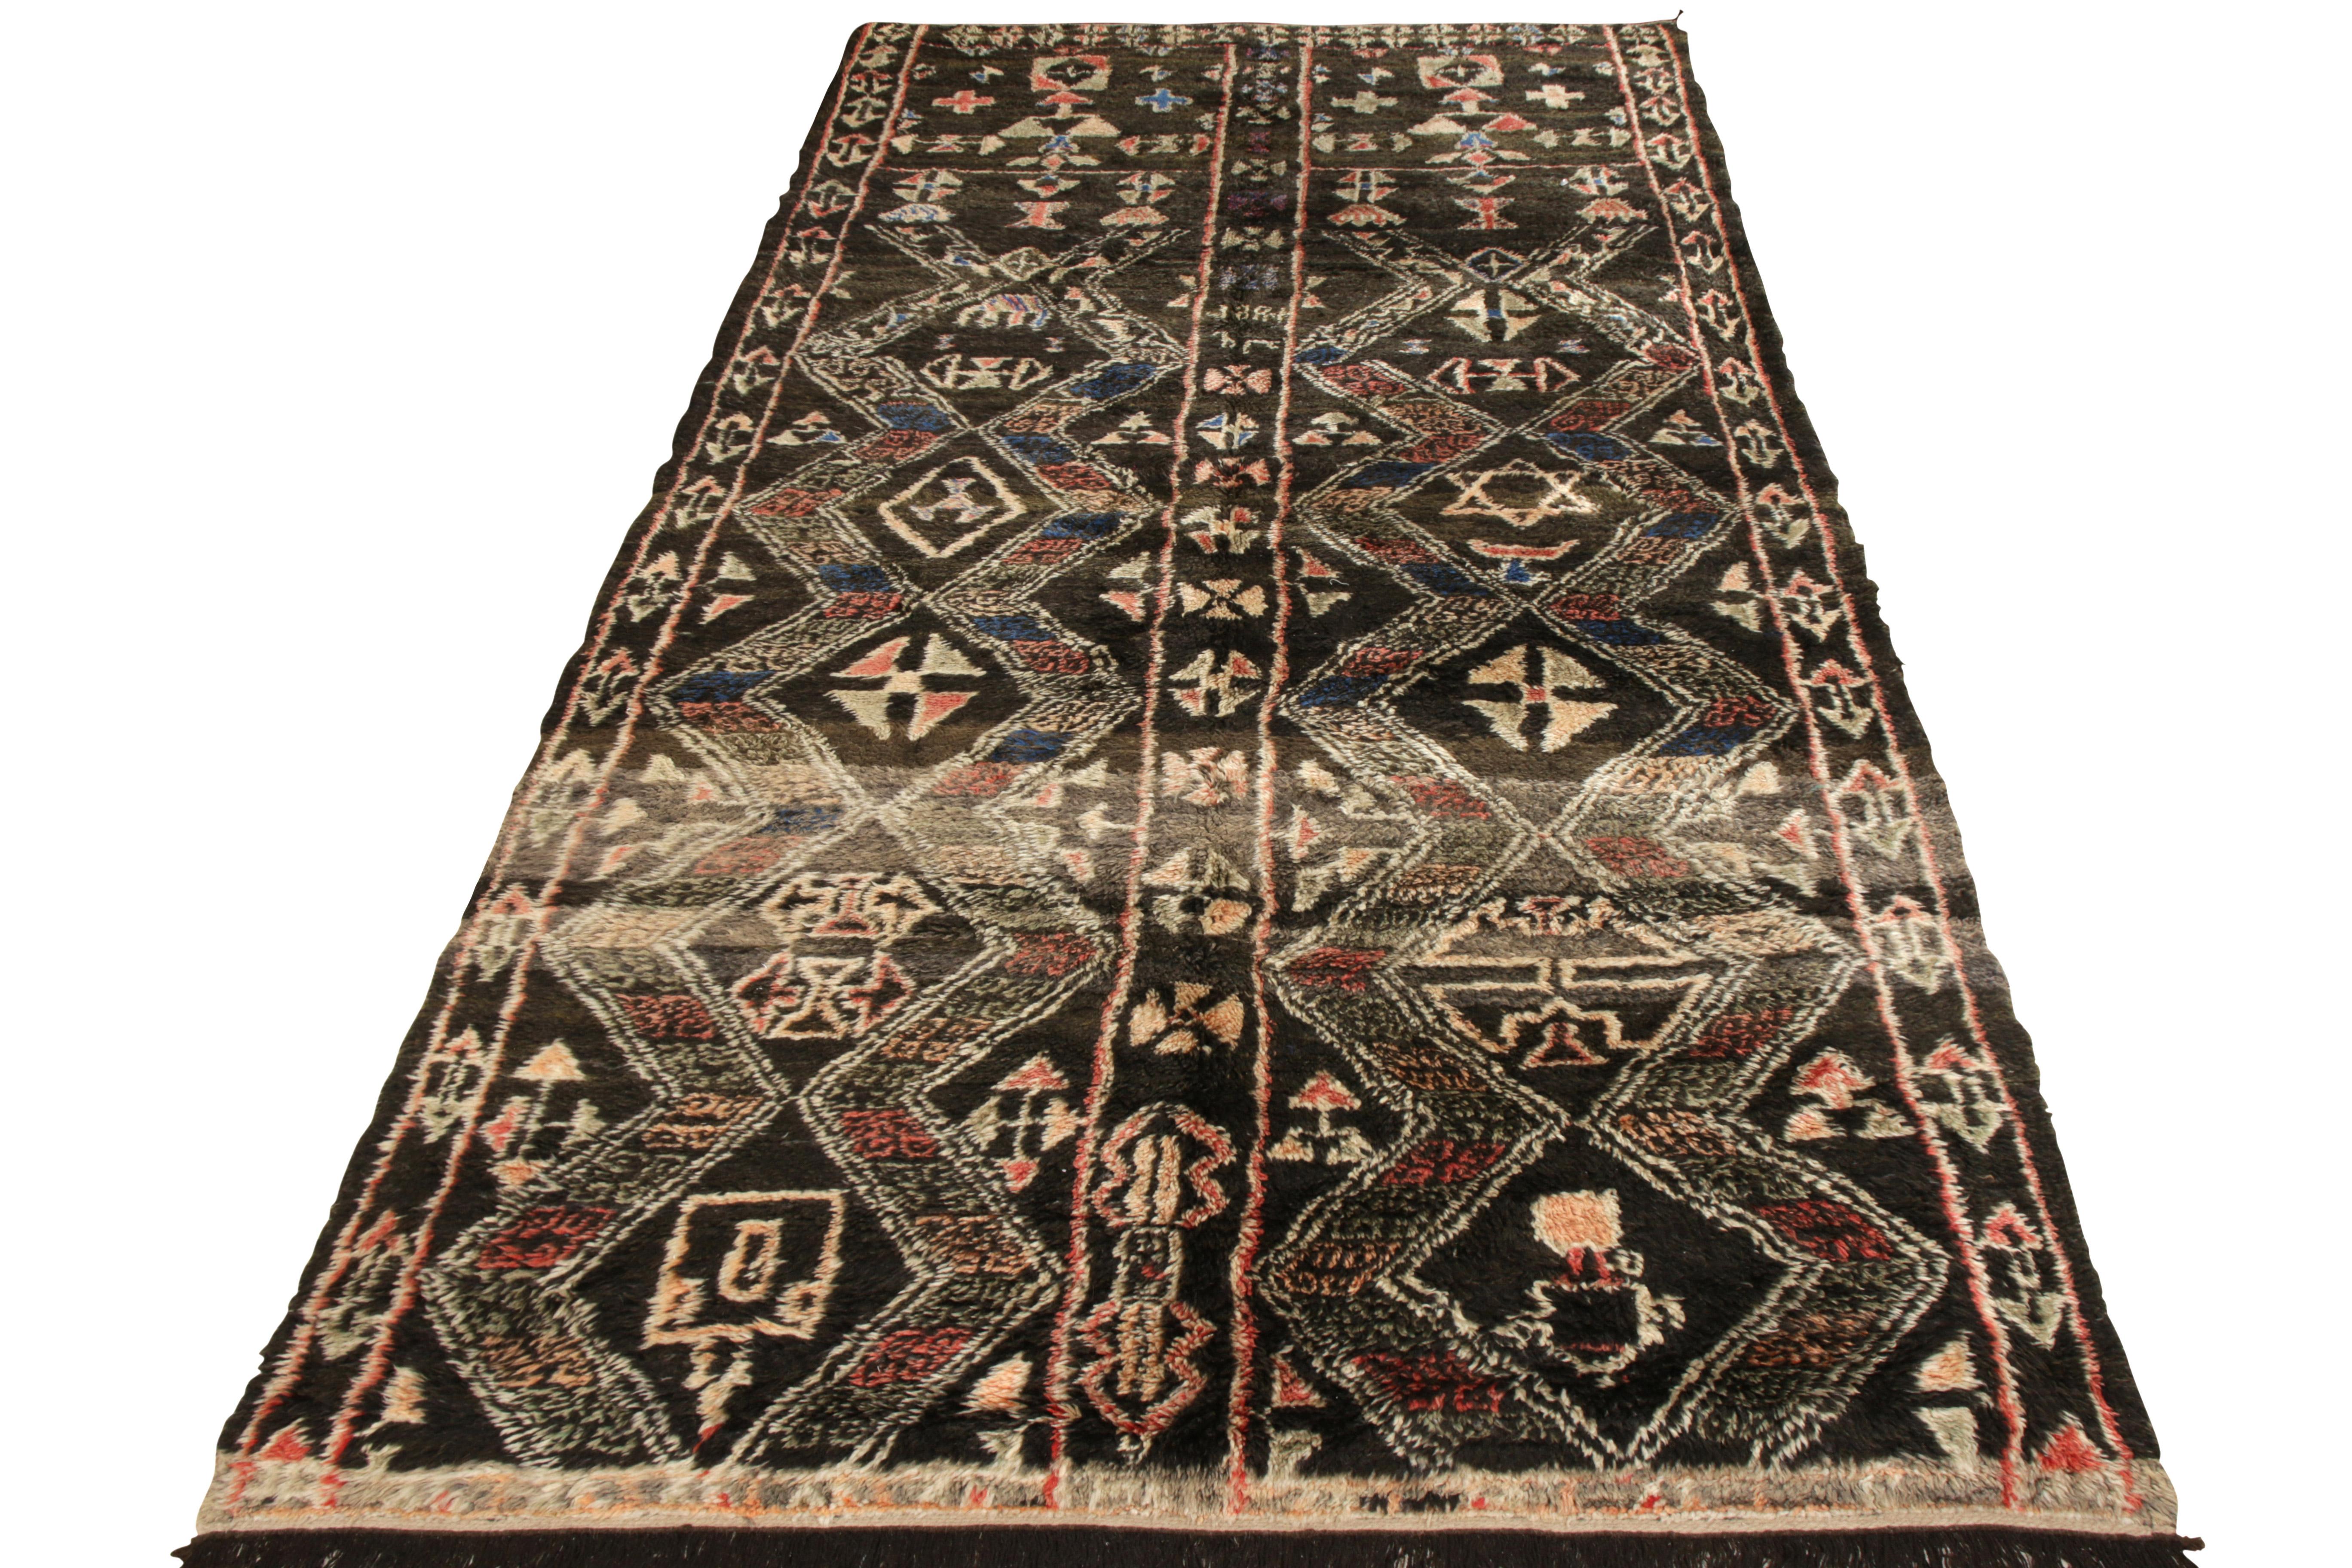 A 6 x 12 vintage Moroccan tribal rug, hand knotted in wool from Morocco circa 1950-1950. The rug comes from a strong community of Moroccan Jews who were rarely seen owning looms or making carpets, especially connoted in the intricate tribal pattern